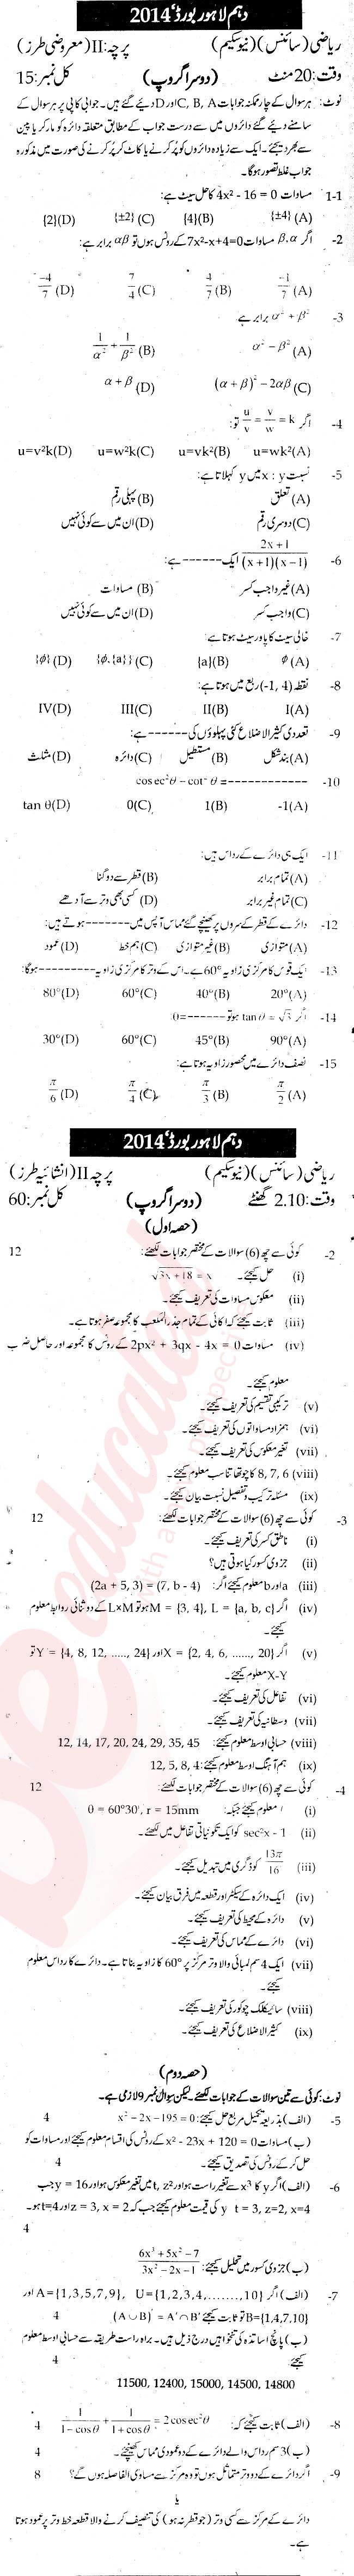 Math 10th class Past Paper Group 2 BISE Lahore 2014